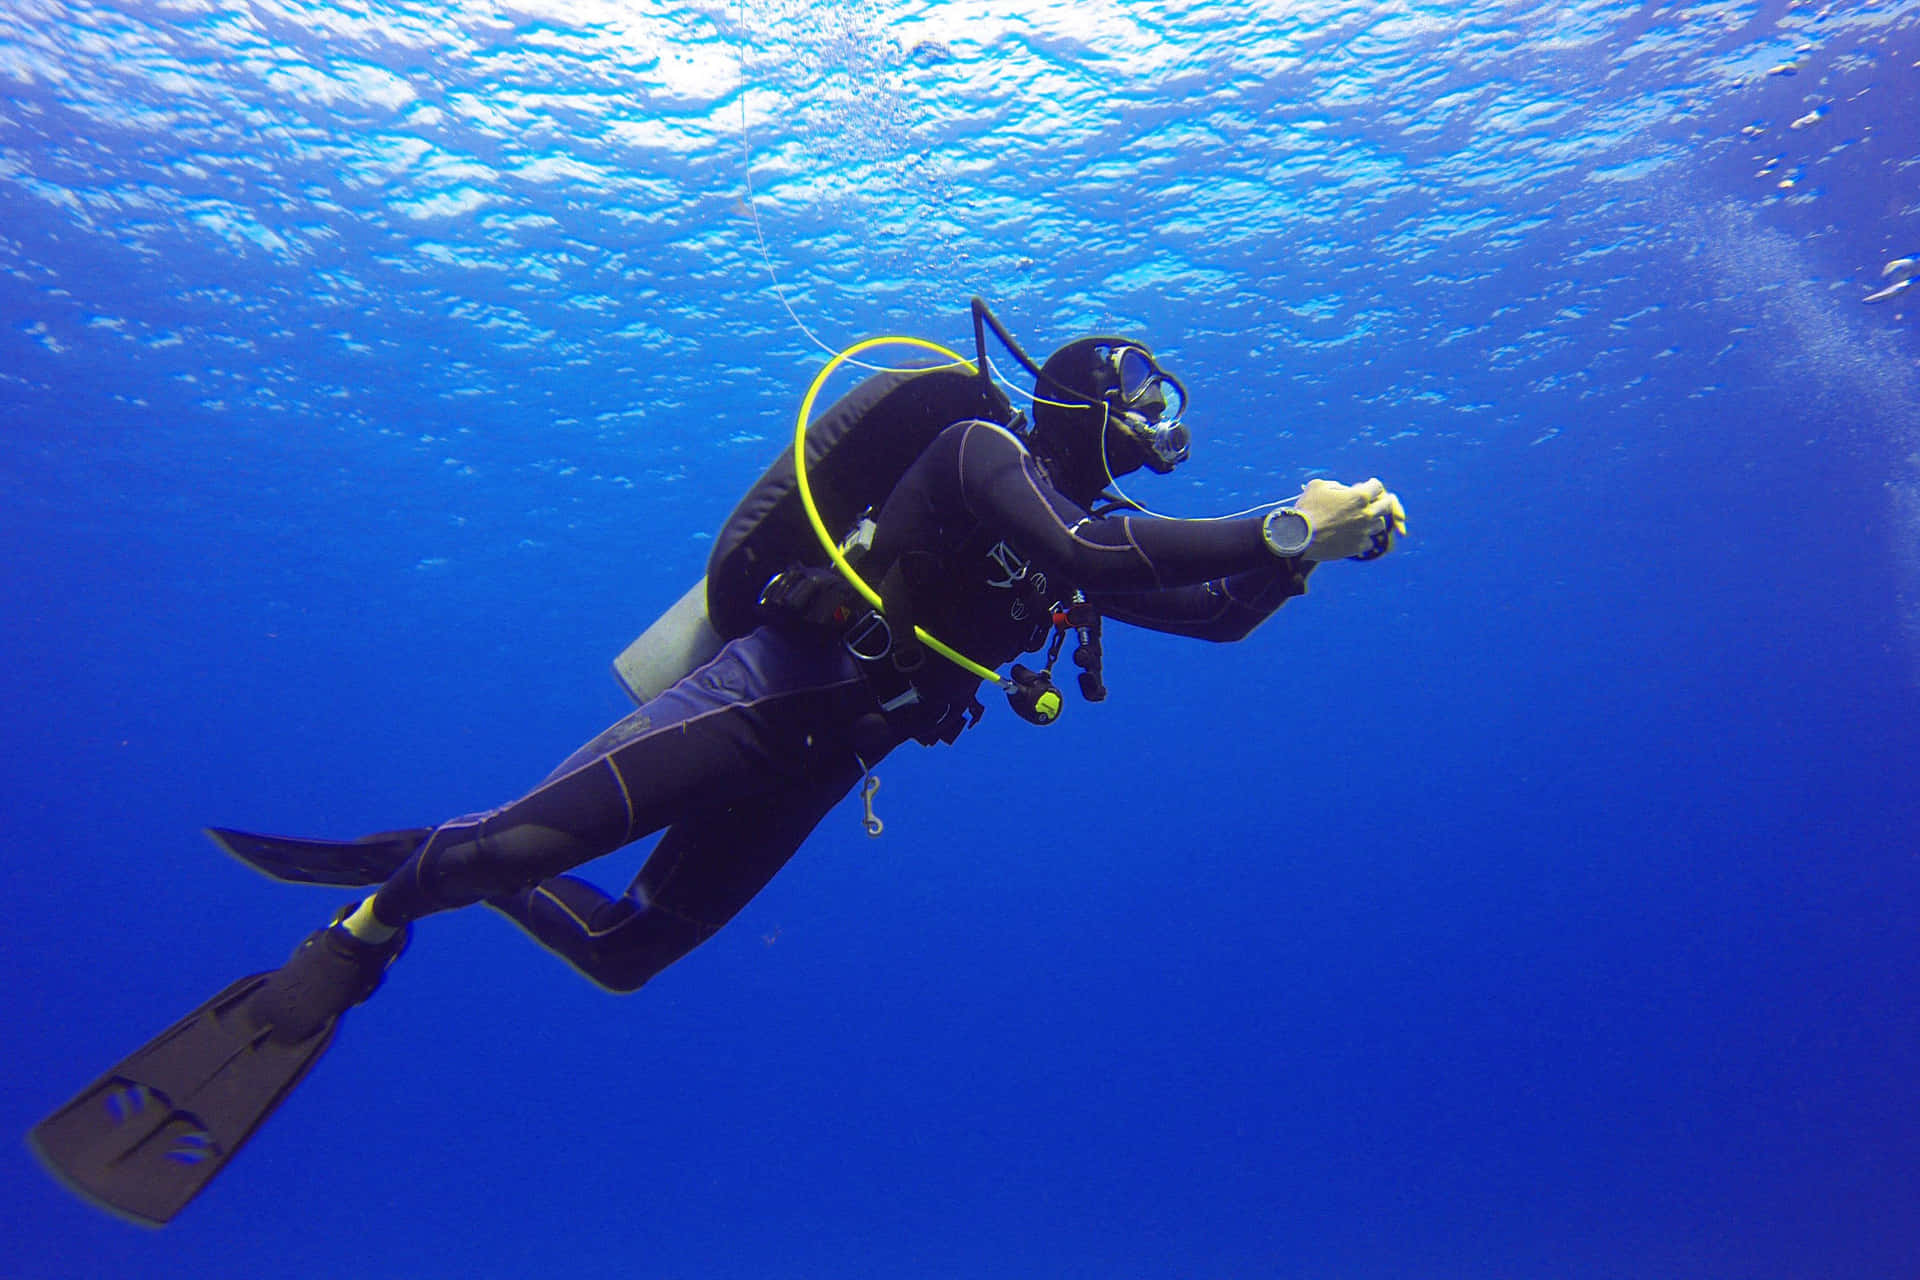 Diving Deep into the Clear Blue - Underwater Adventure